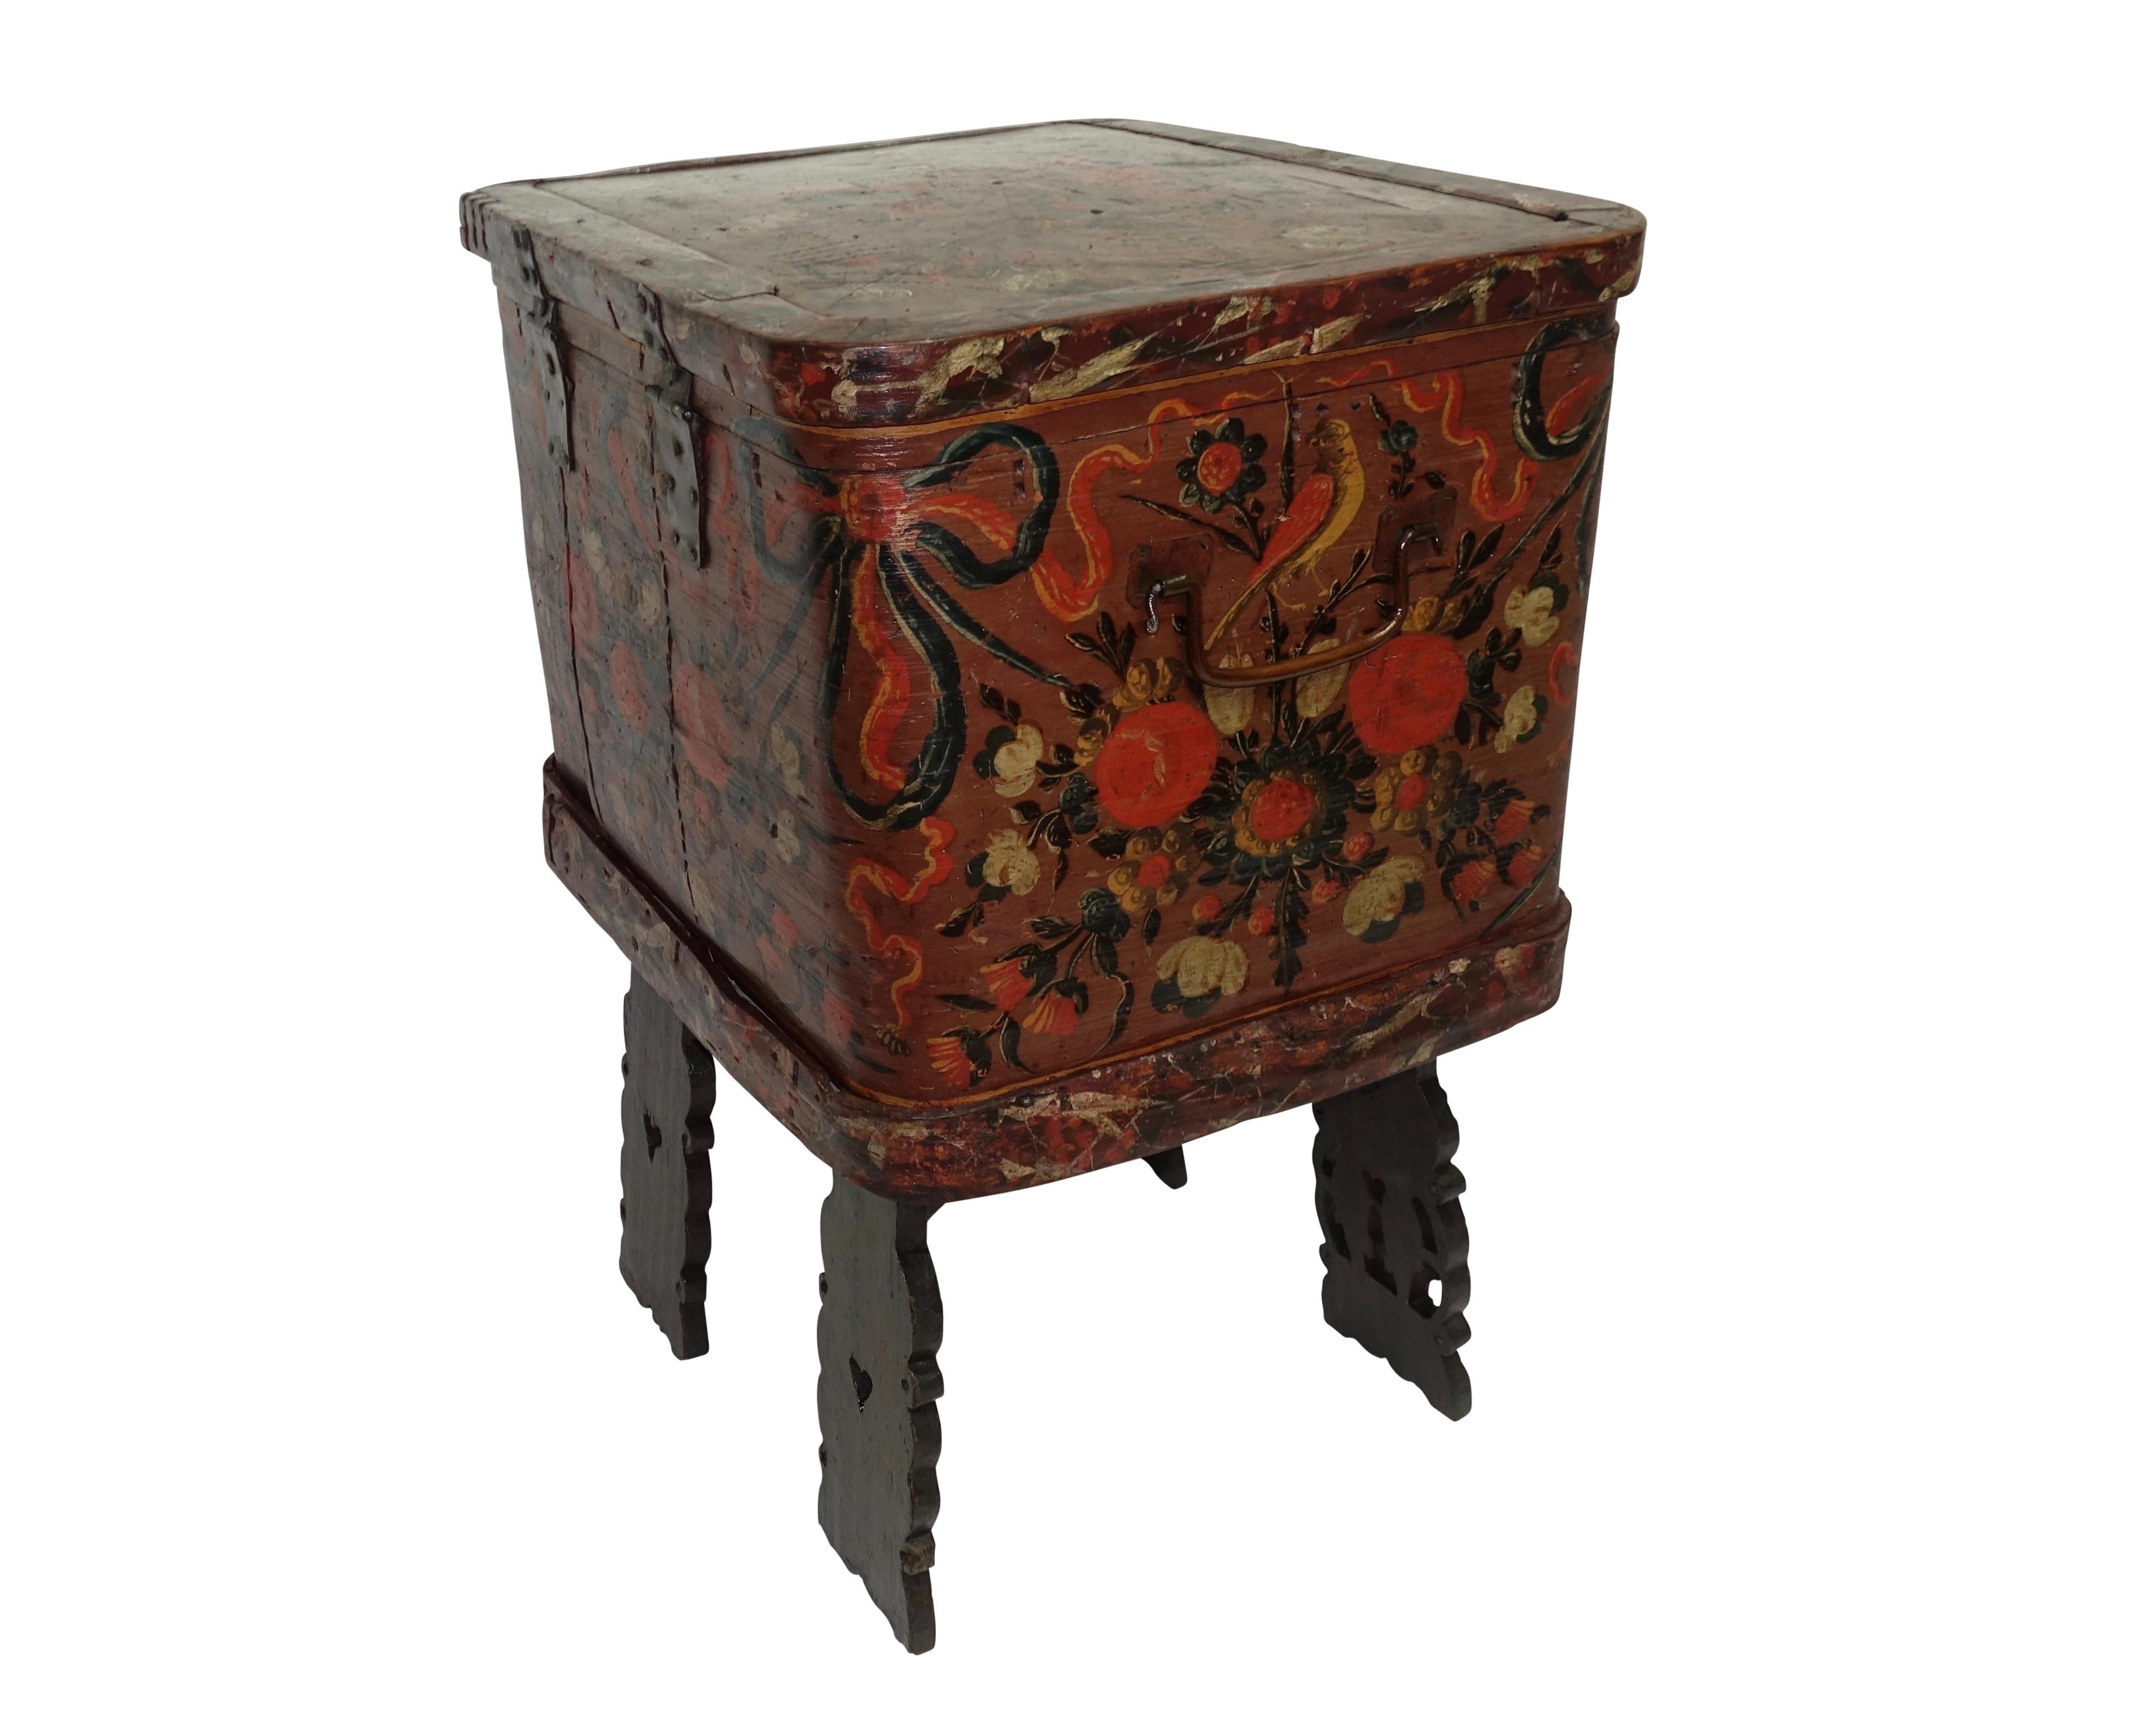 Norwegian Scandinavian Painted Dowery Chest, circa 1800 In Good Condition For Sale In San Francisco, CA